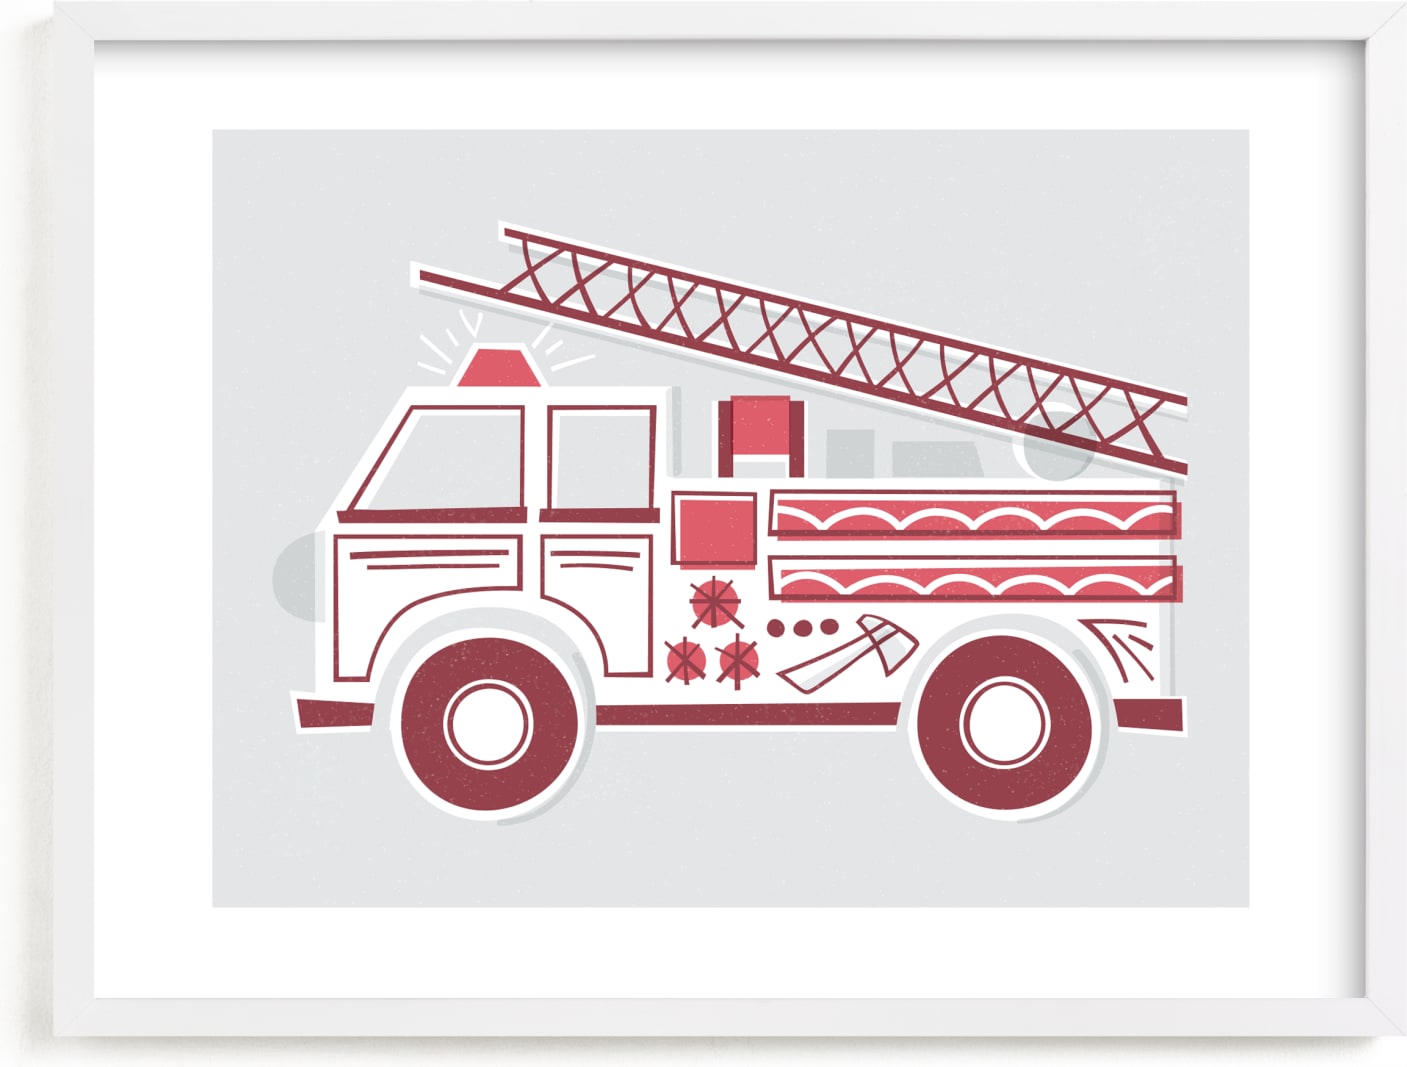 This is a black and white kids wall art by Jessie Steury called Fancy Firetruck.